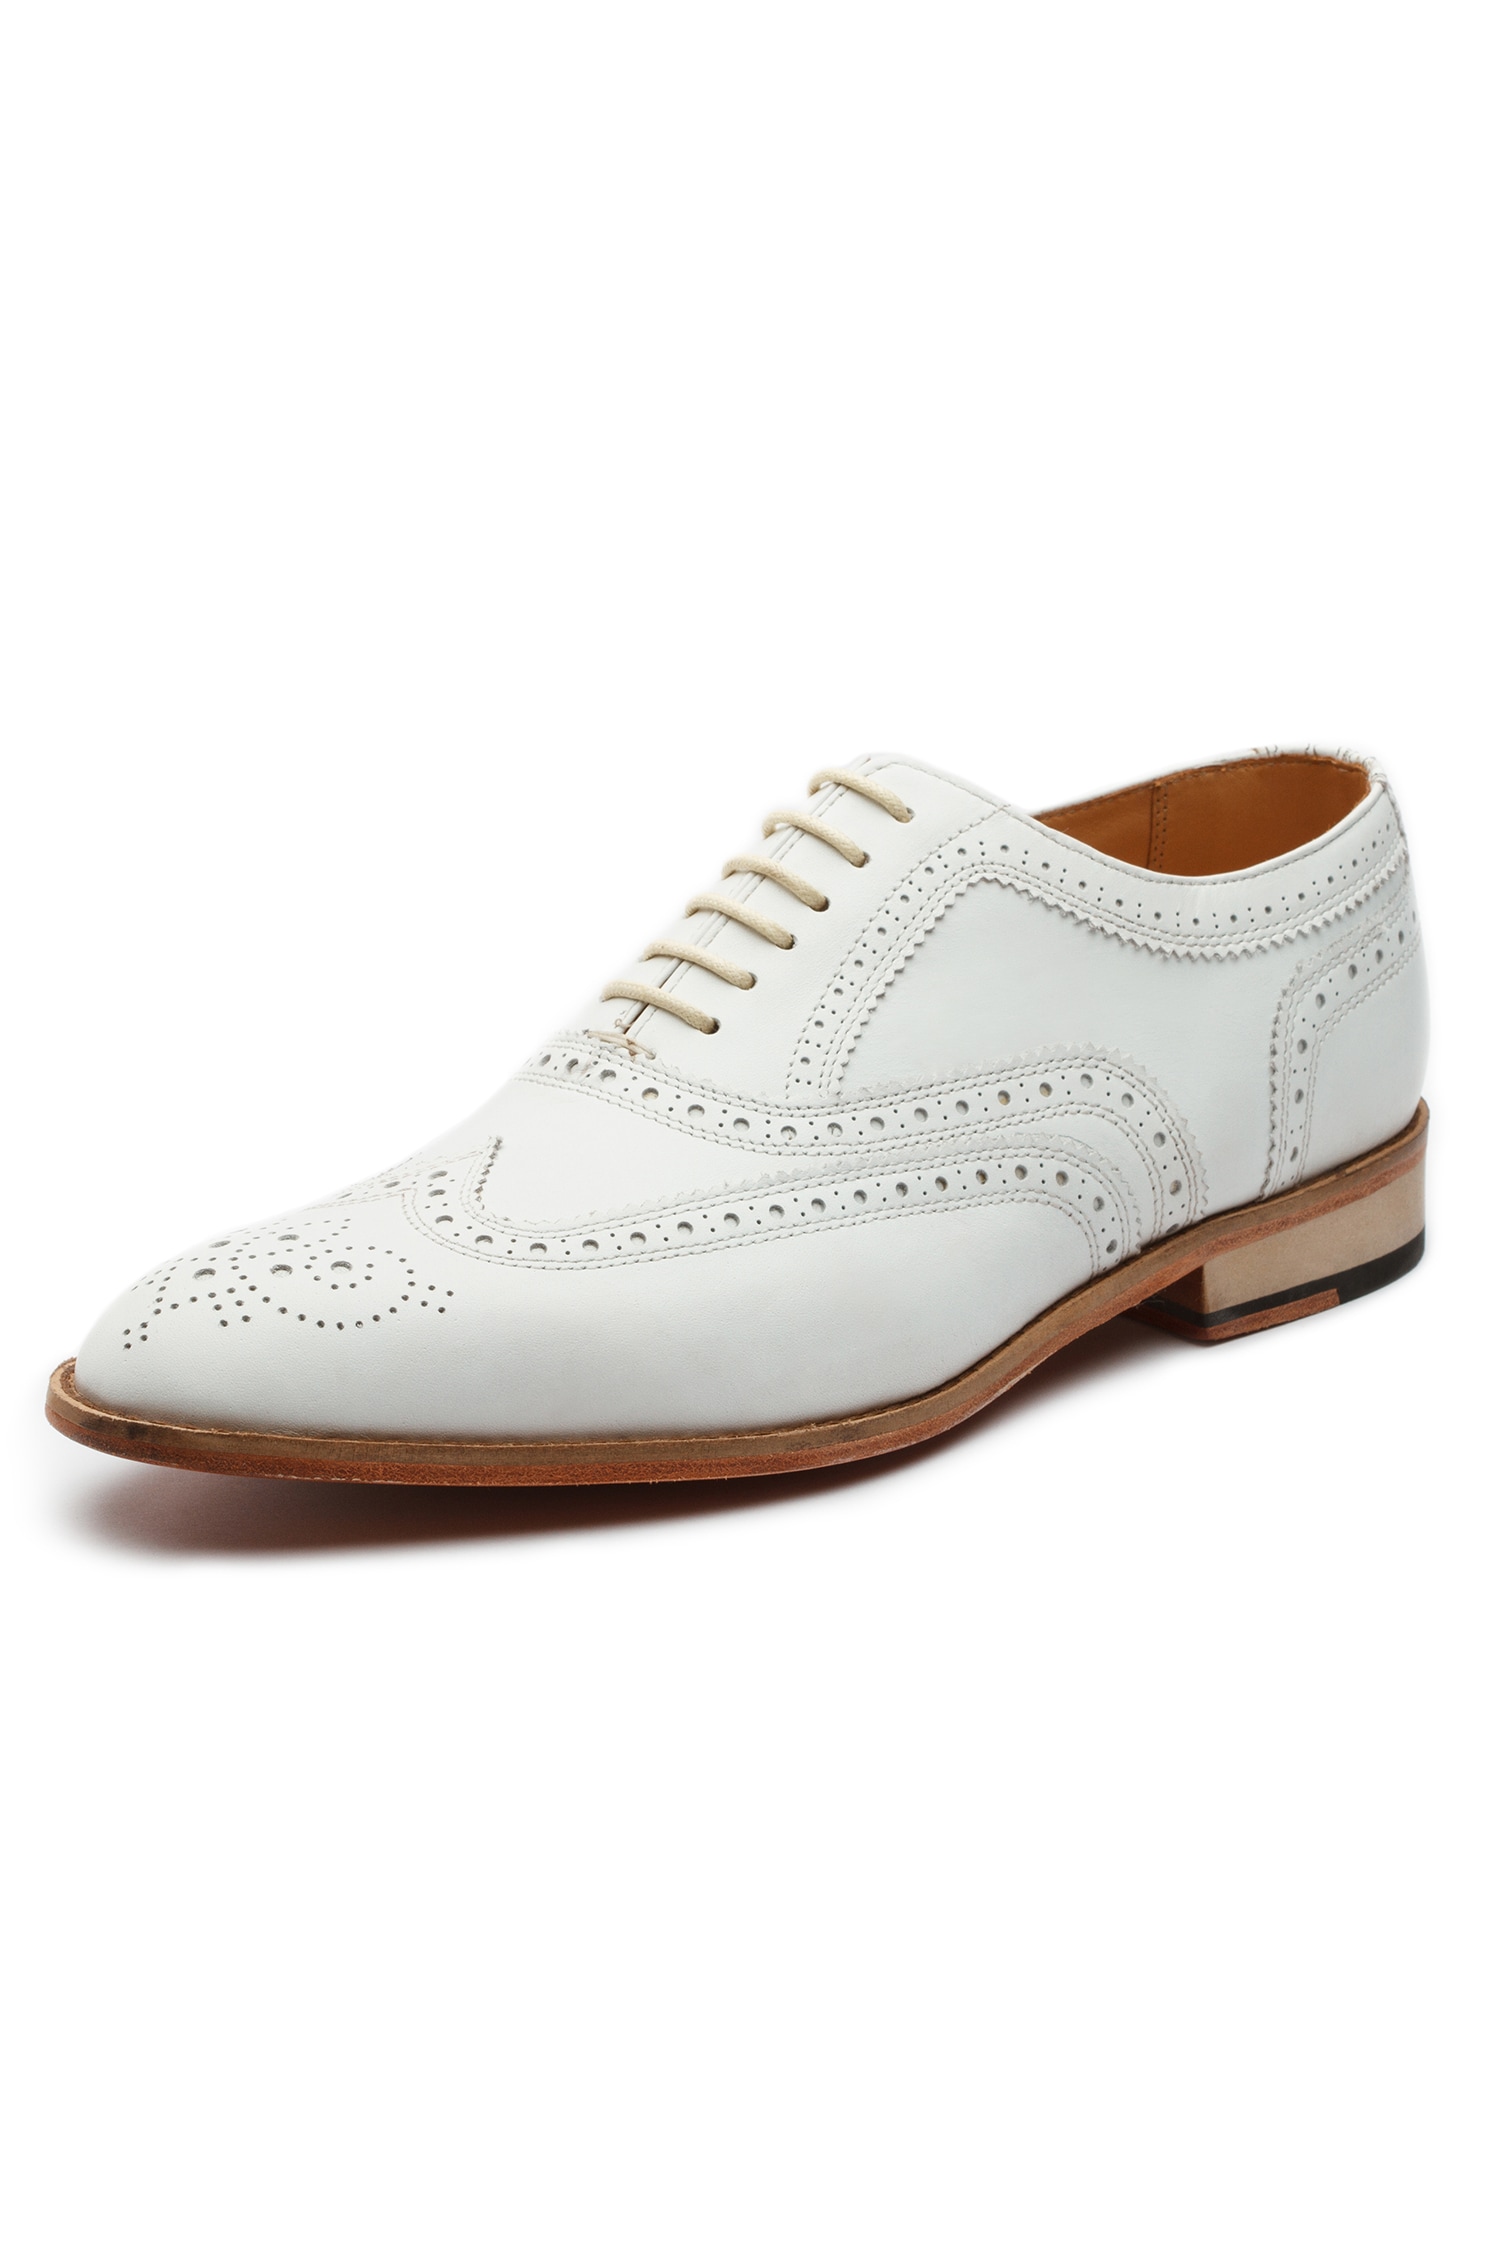 Lutton Boys Formal White Dress Shoes | White Derby Shoes | White Stylish  Shoes | Joota Corporate Casuals For Men - Buy Lutton Boys Formal White  Dress Shoes | White Derby Shoes |